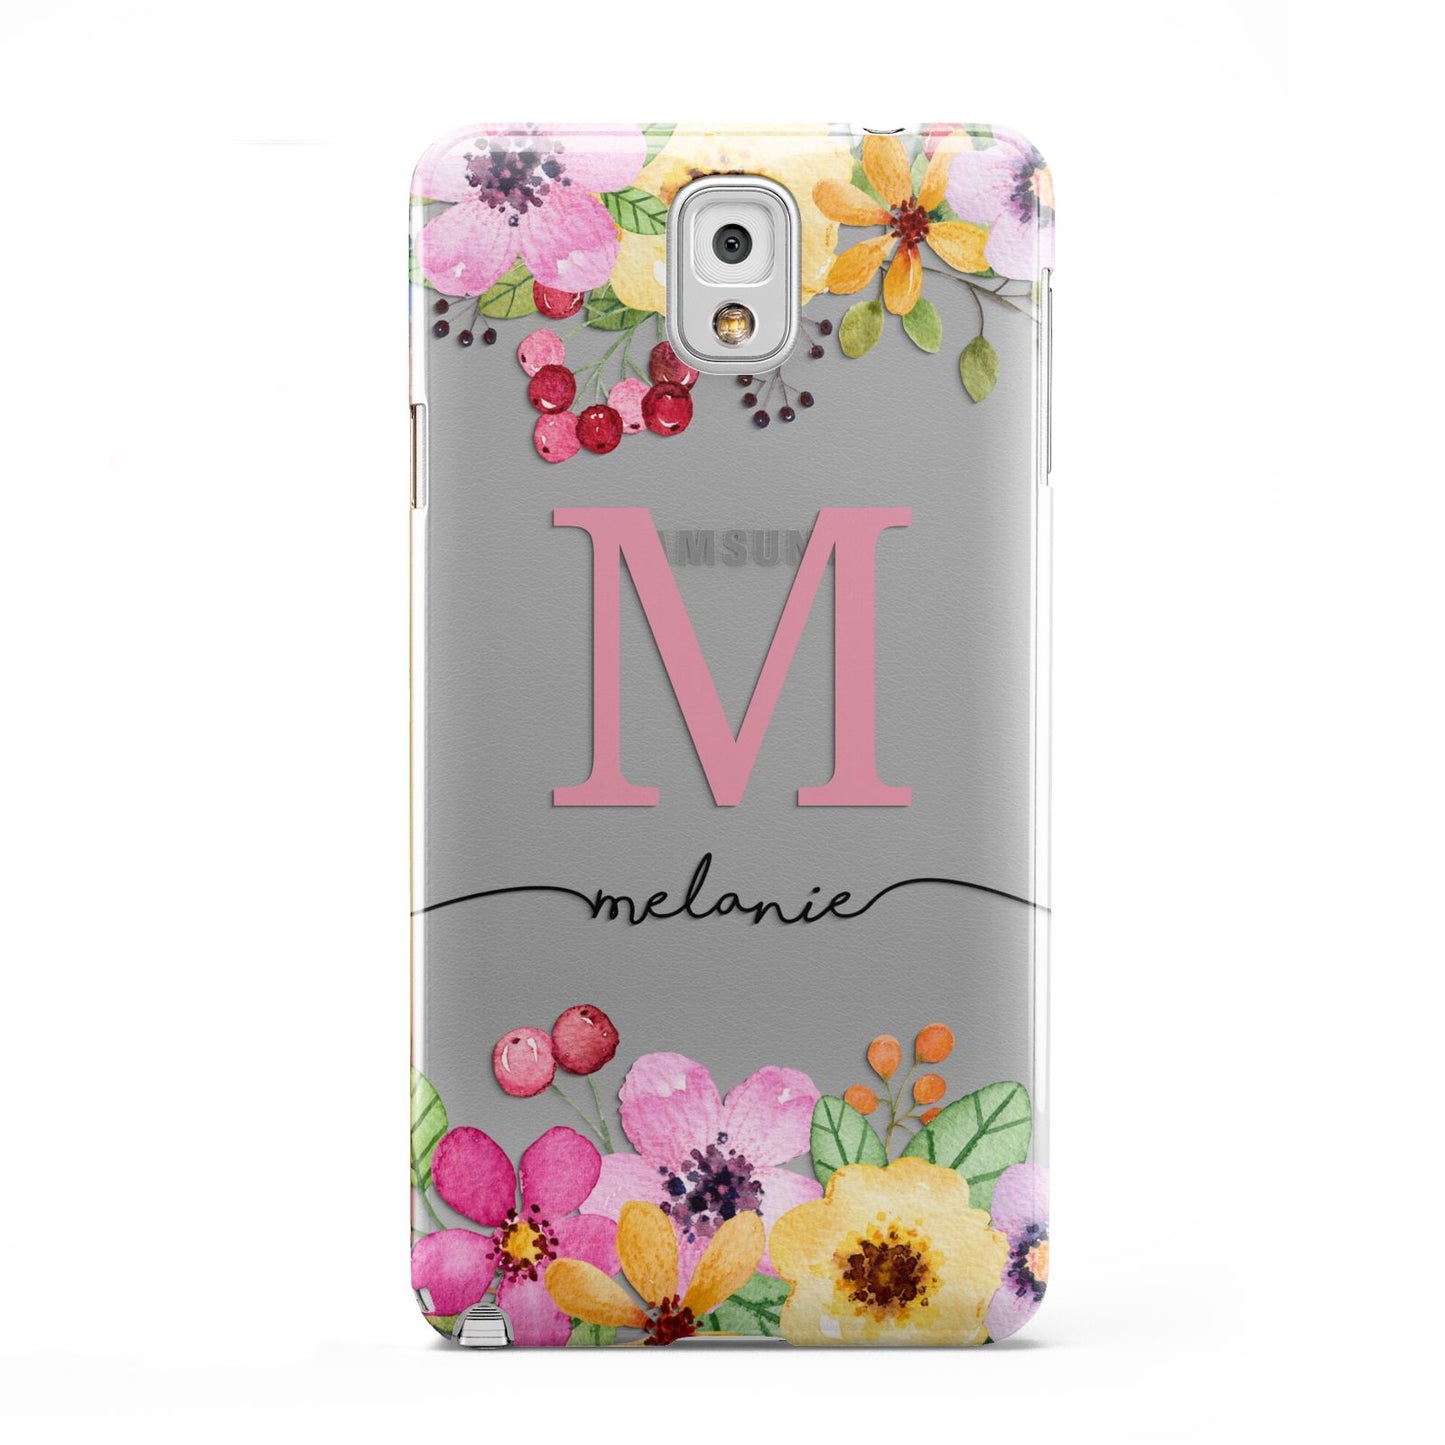 Personalised Summer Flowers Samsung Galaxy Note 3 Case